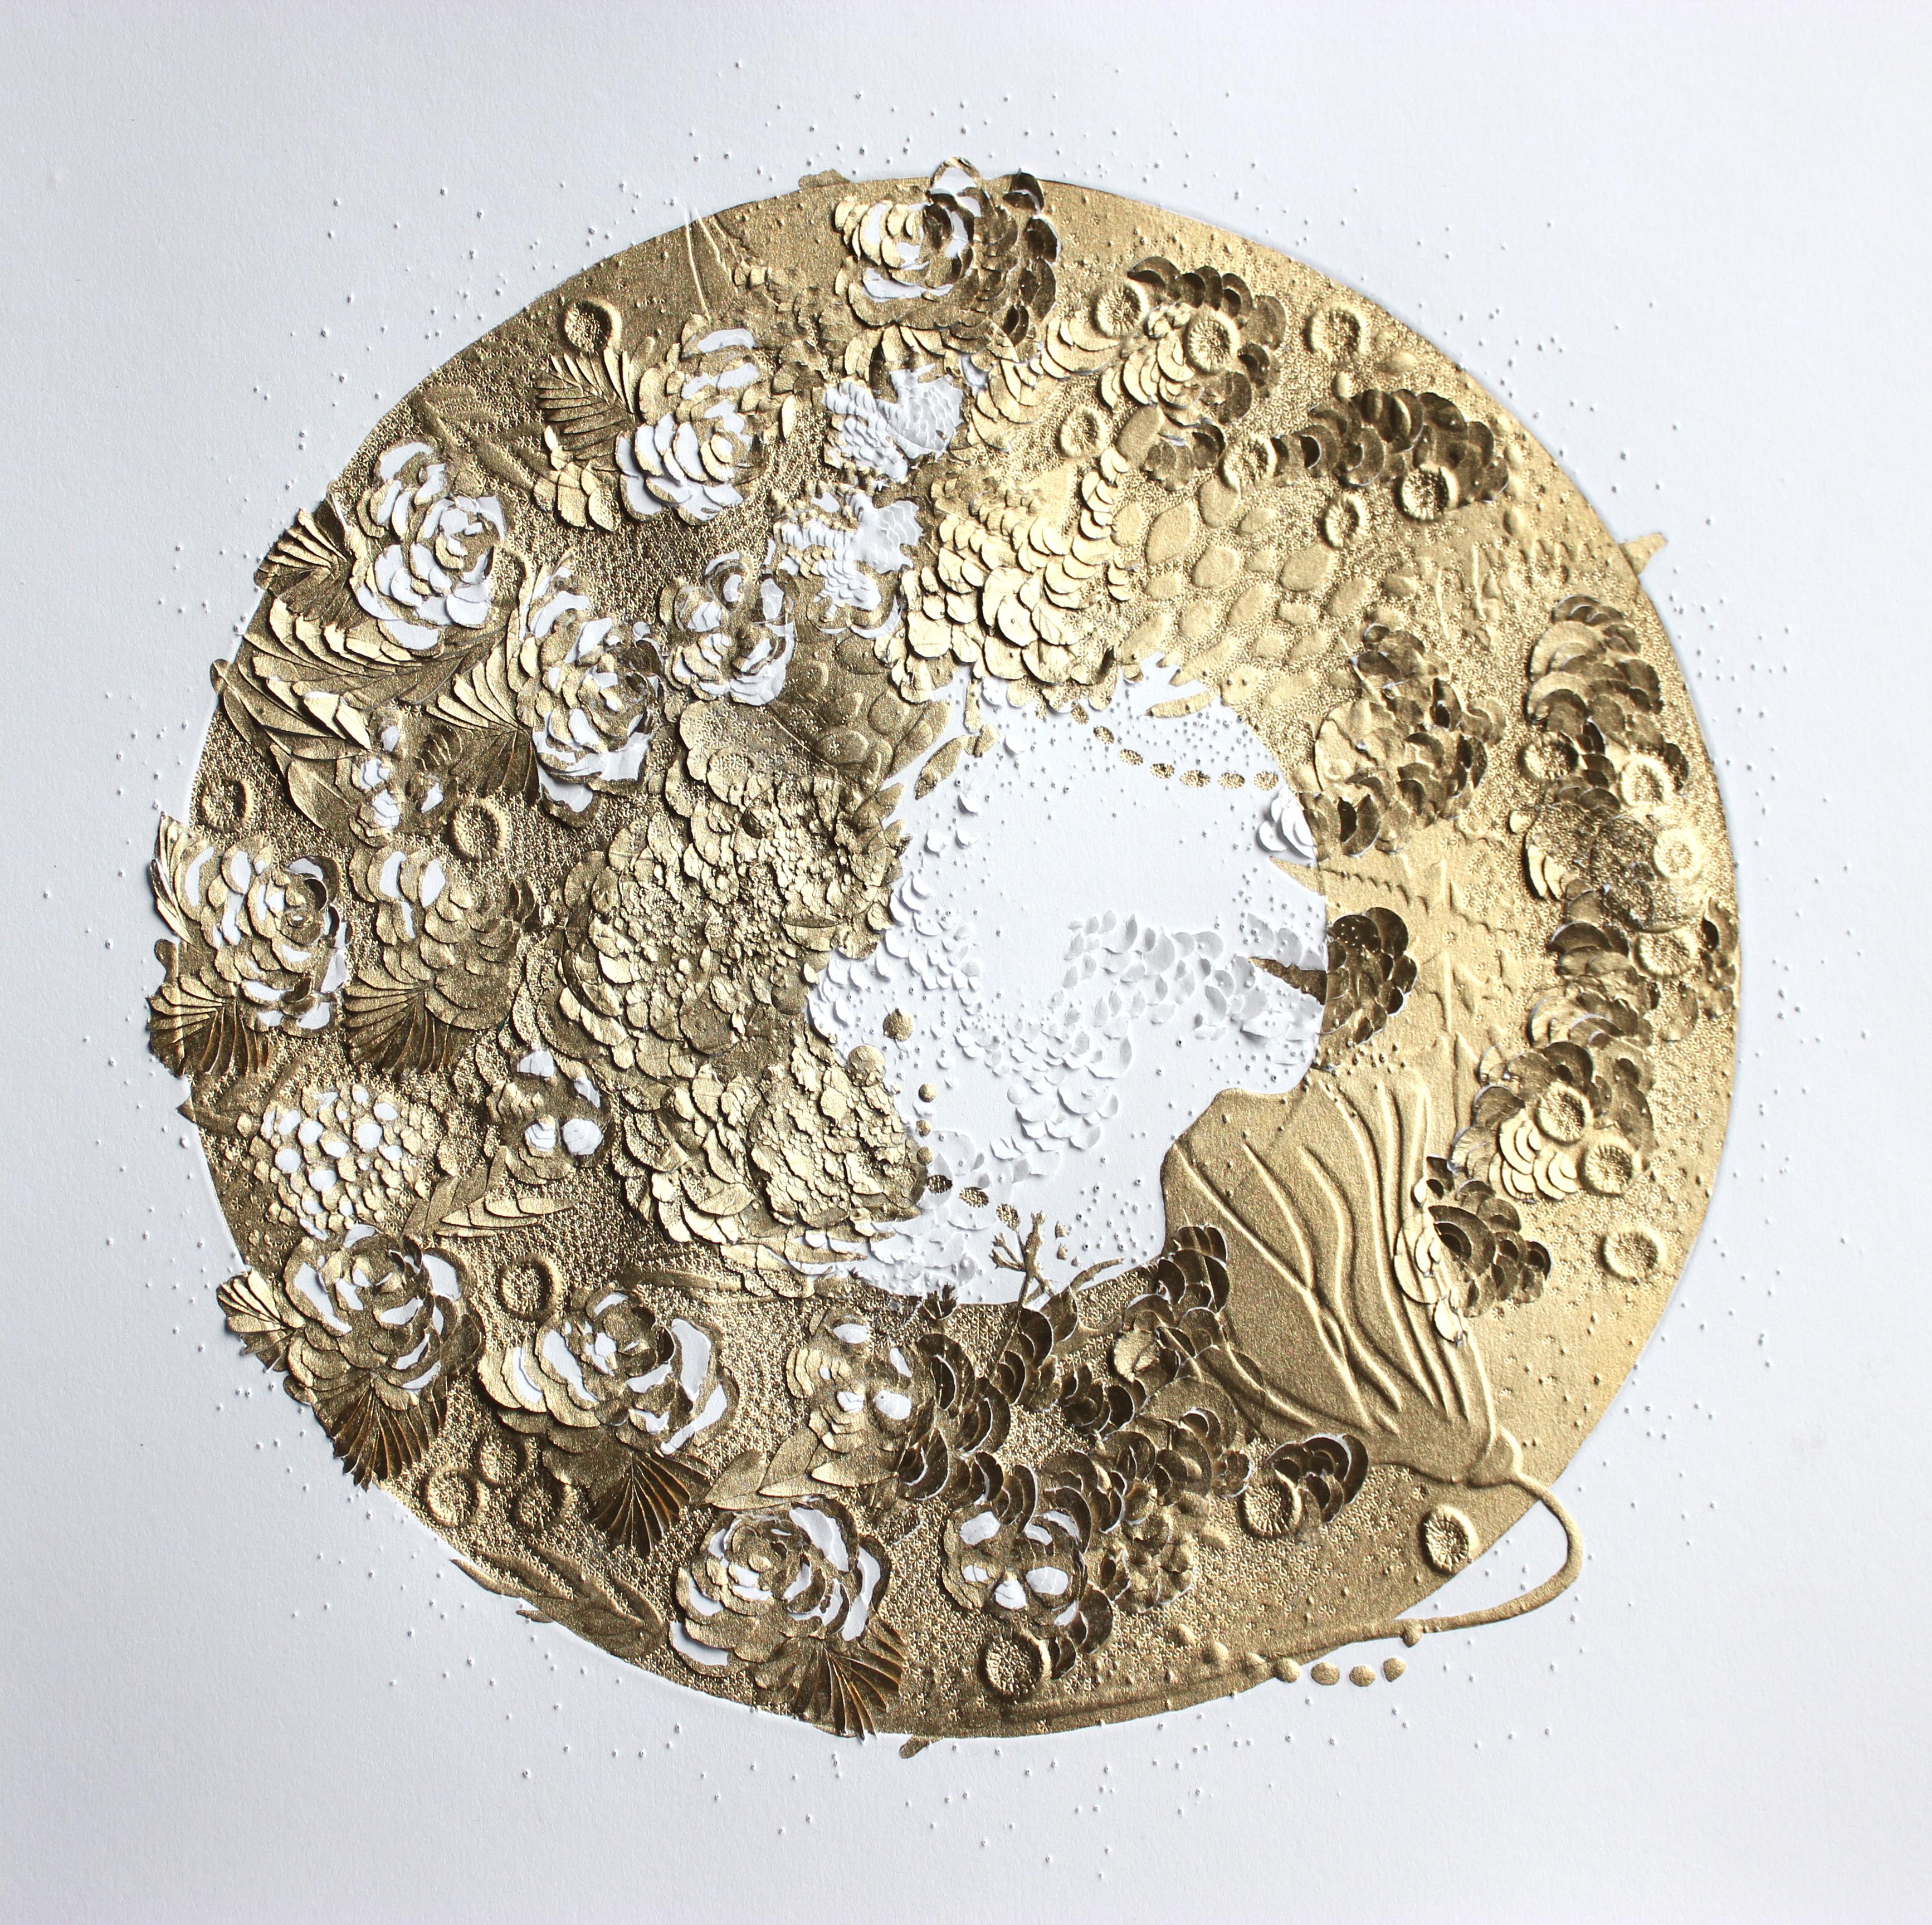 Anne-Charlotte Saliba Abstract Drawing - Gold bubble 5 - round textural abstract nature inspired 3D sculpted paper